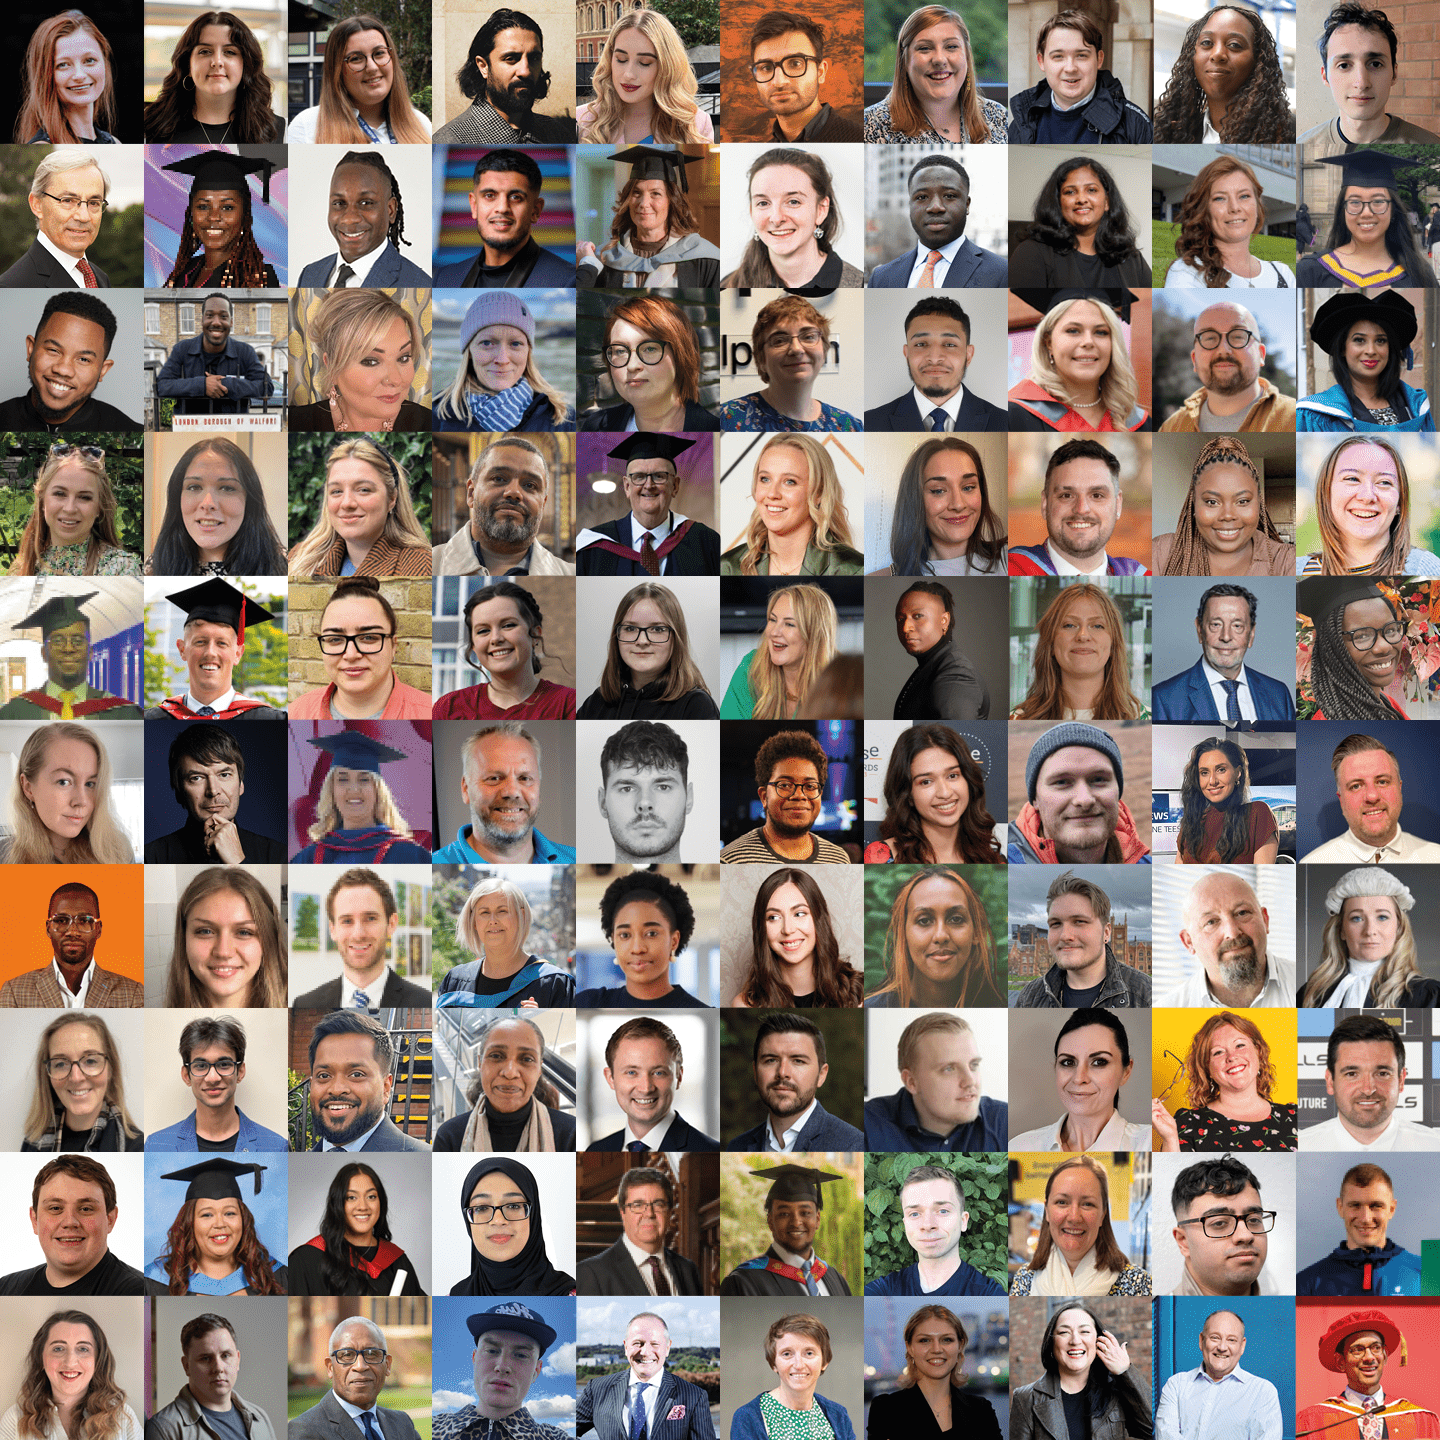 Collage showing the 100 faces of the campaign in rows of 10